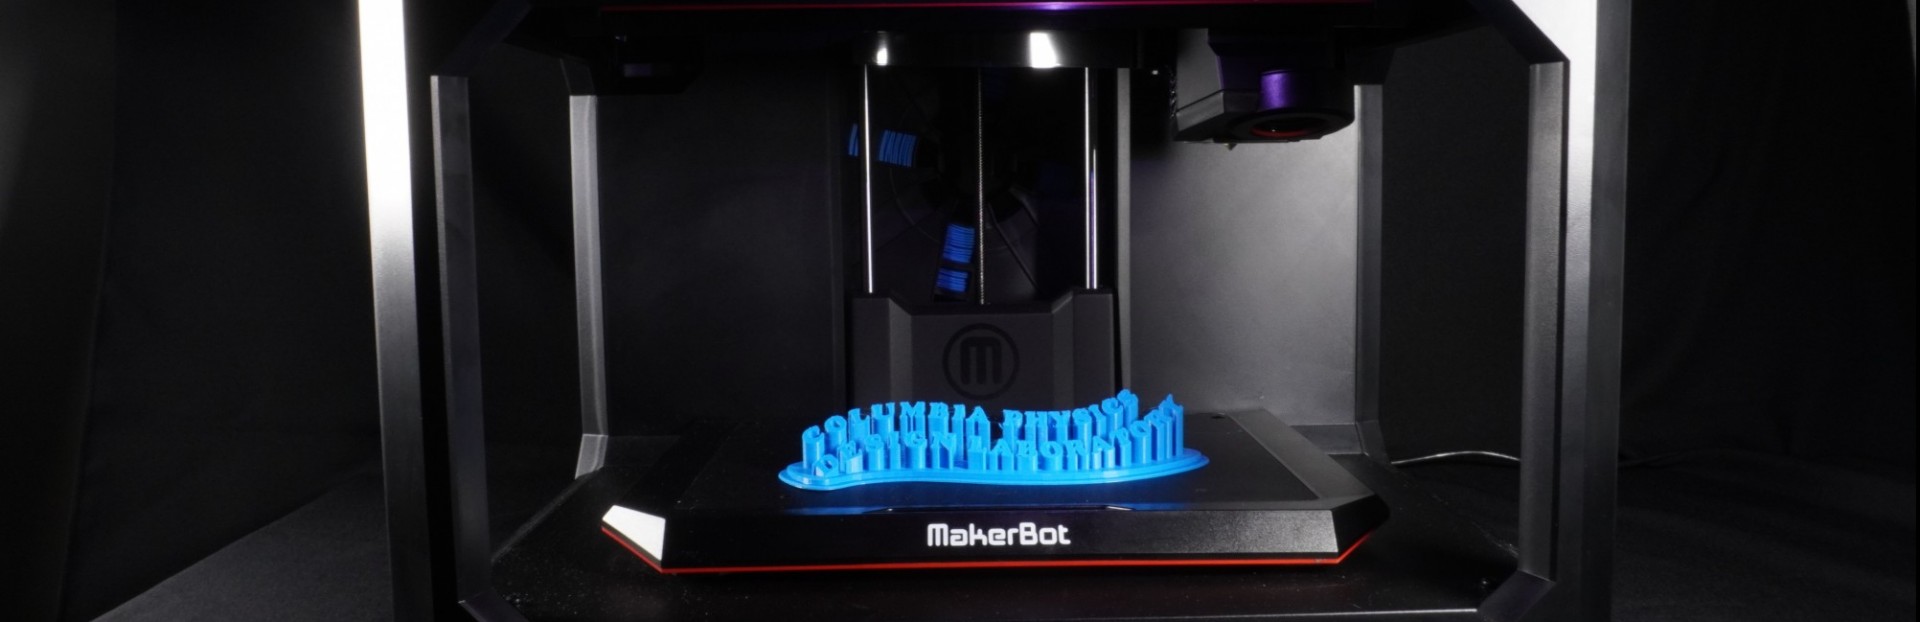 Image of a MakerBot Replicator+ 3D printer with a 3D printed logo saying "Columbia Physics Design Lab"